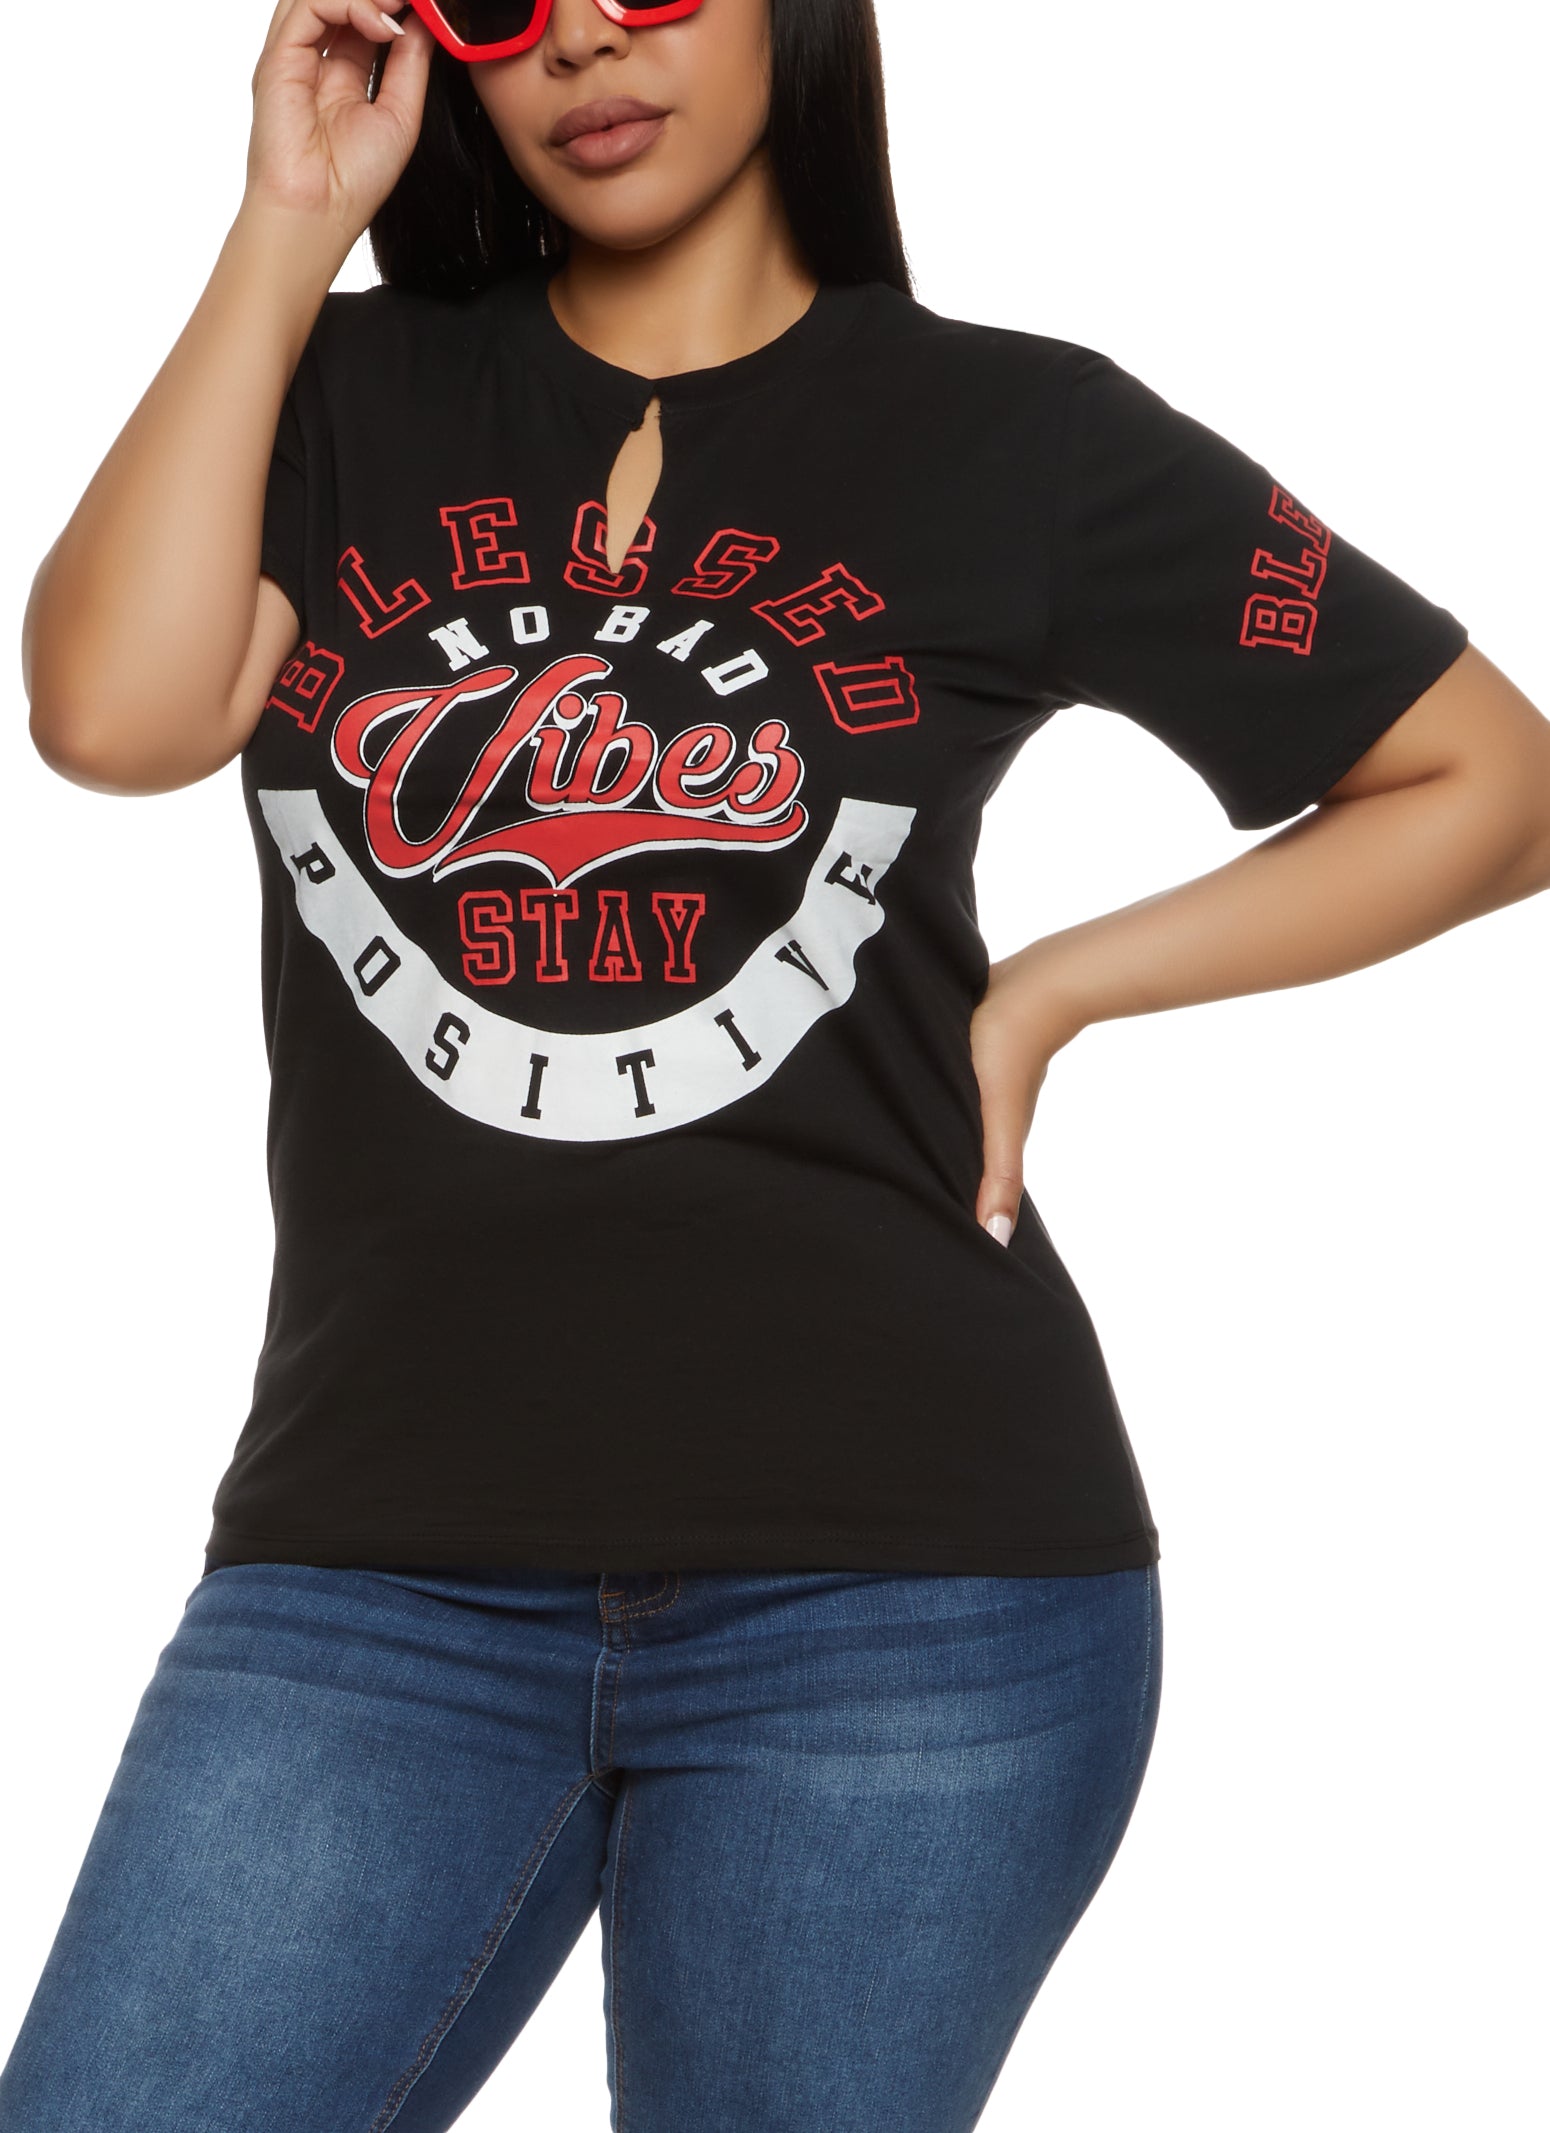 Womens Plus Size Blessed No Bad Vibes Stay Positive Notch Neck Tee, Black, Size 3X